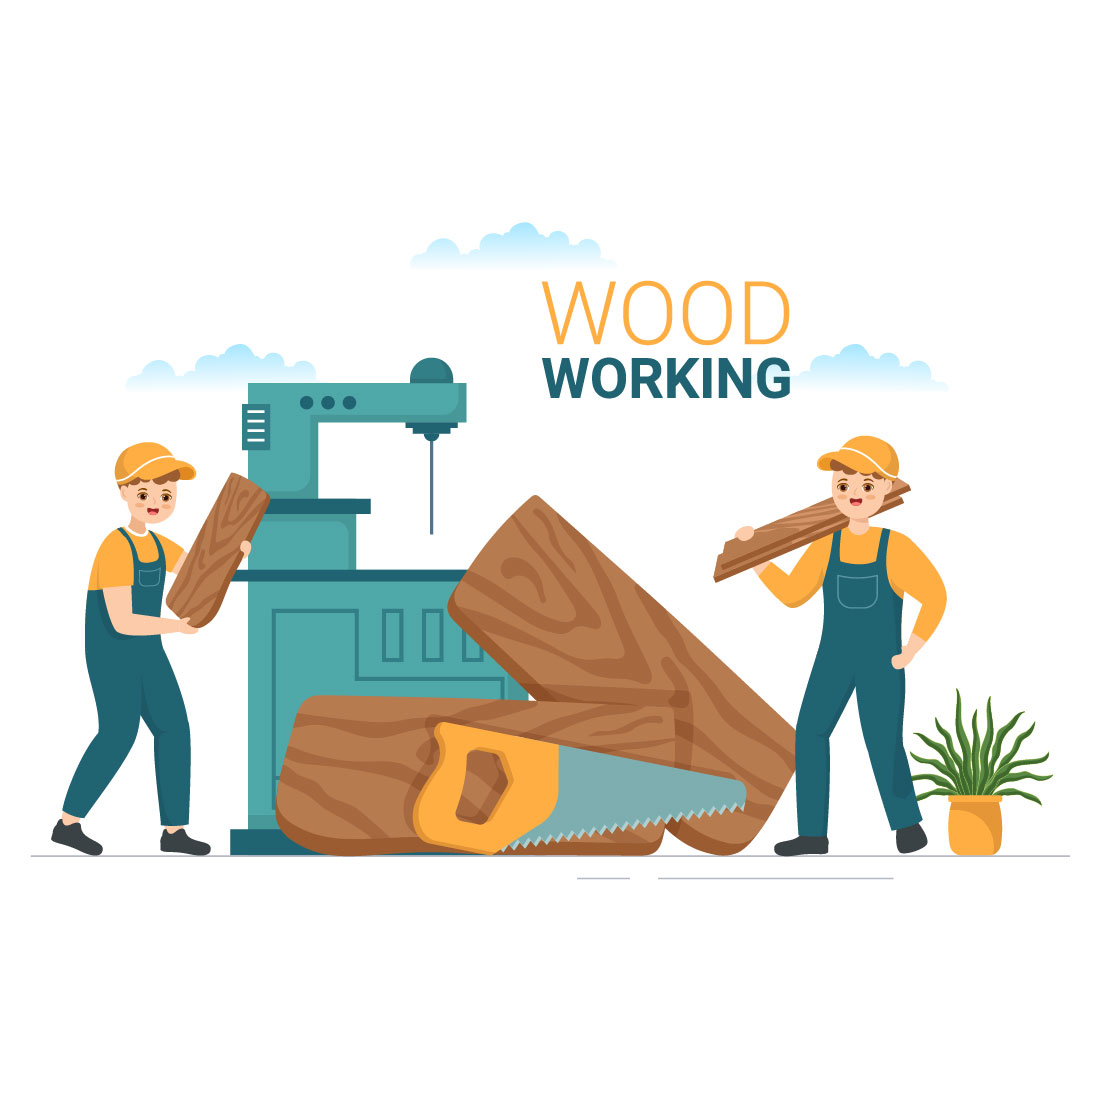 Woodworking Illustration cover image.